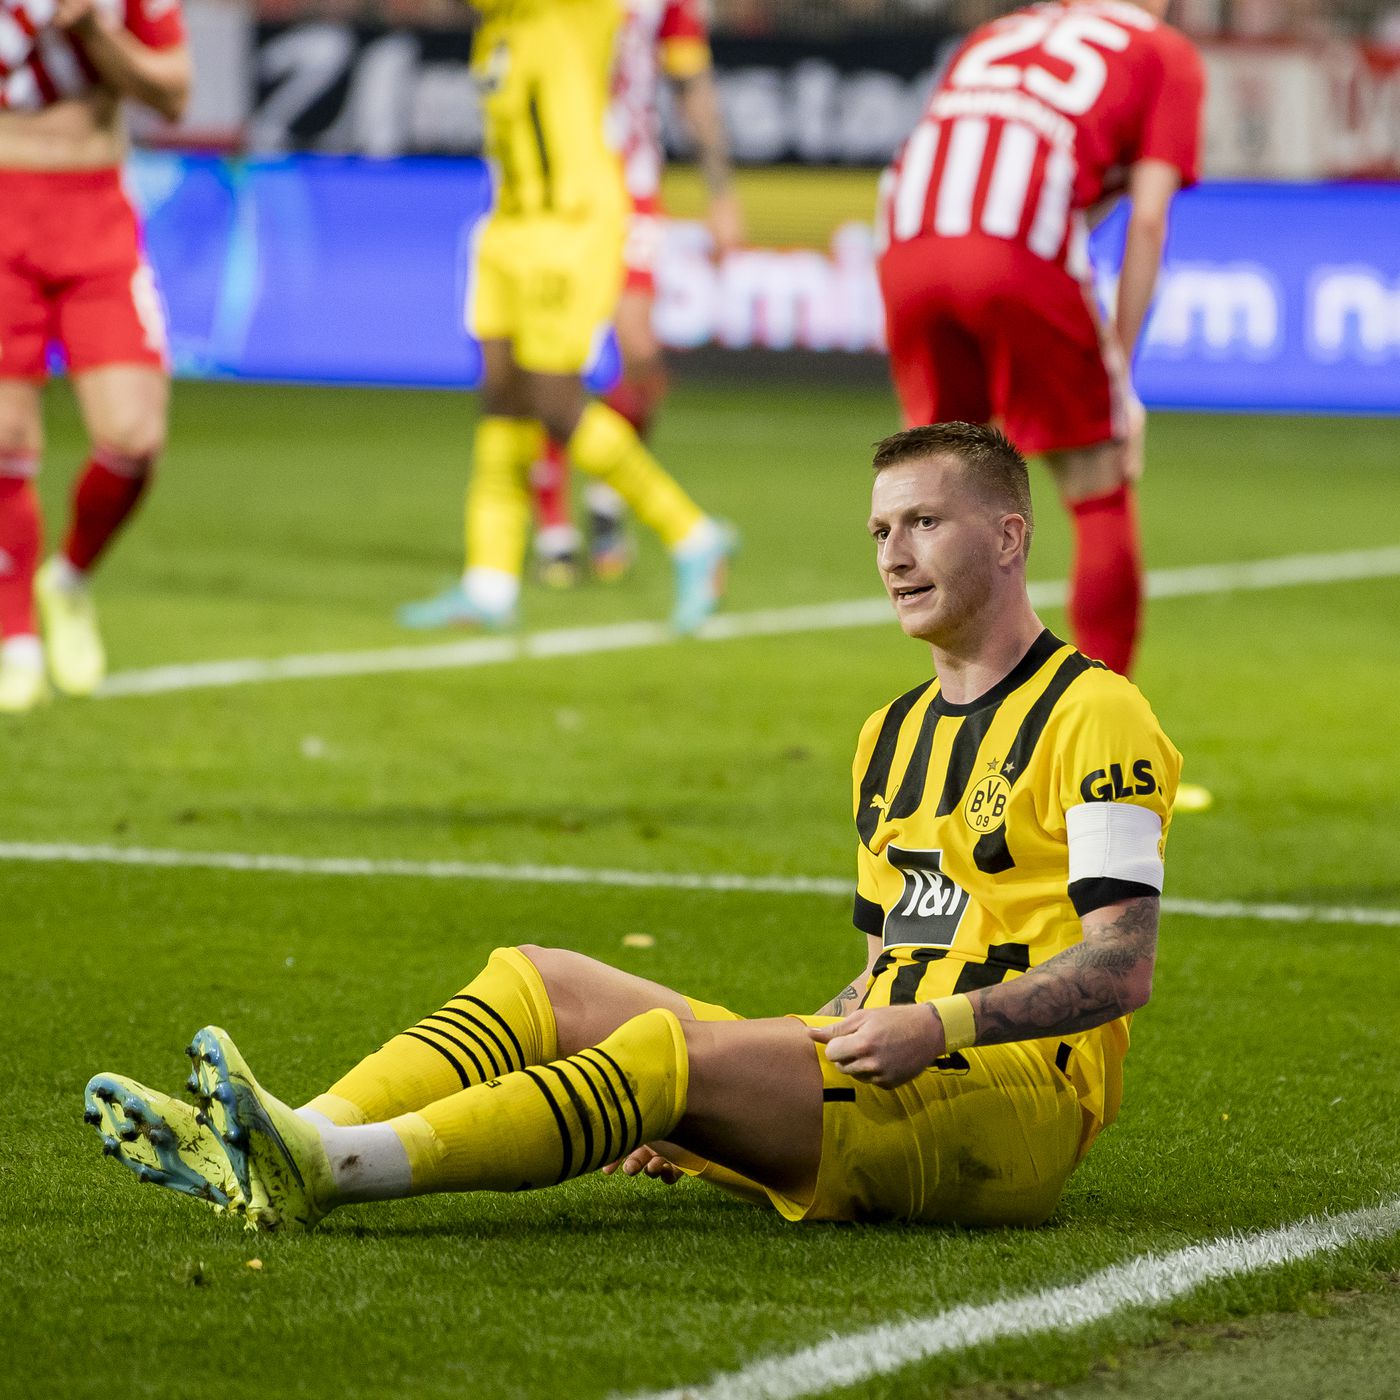 Marco Reus to Miss the World Cup With an Ankle Injury - Fear The Wall